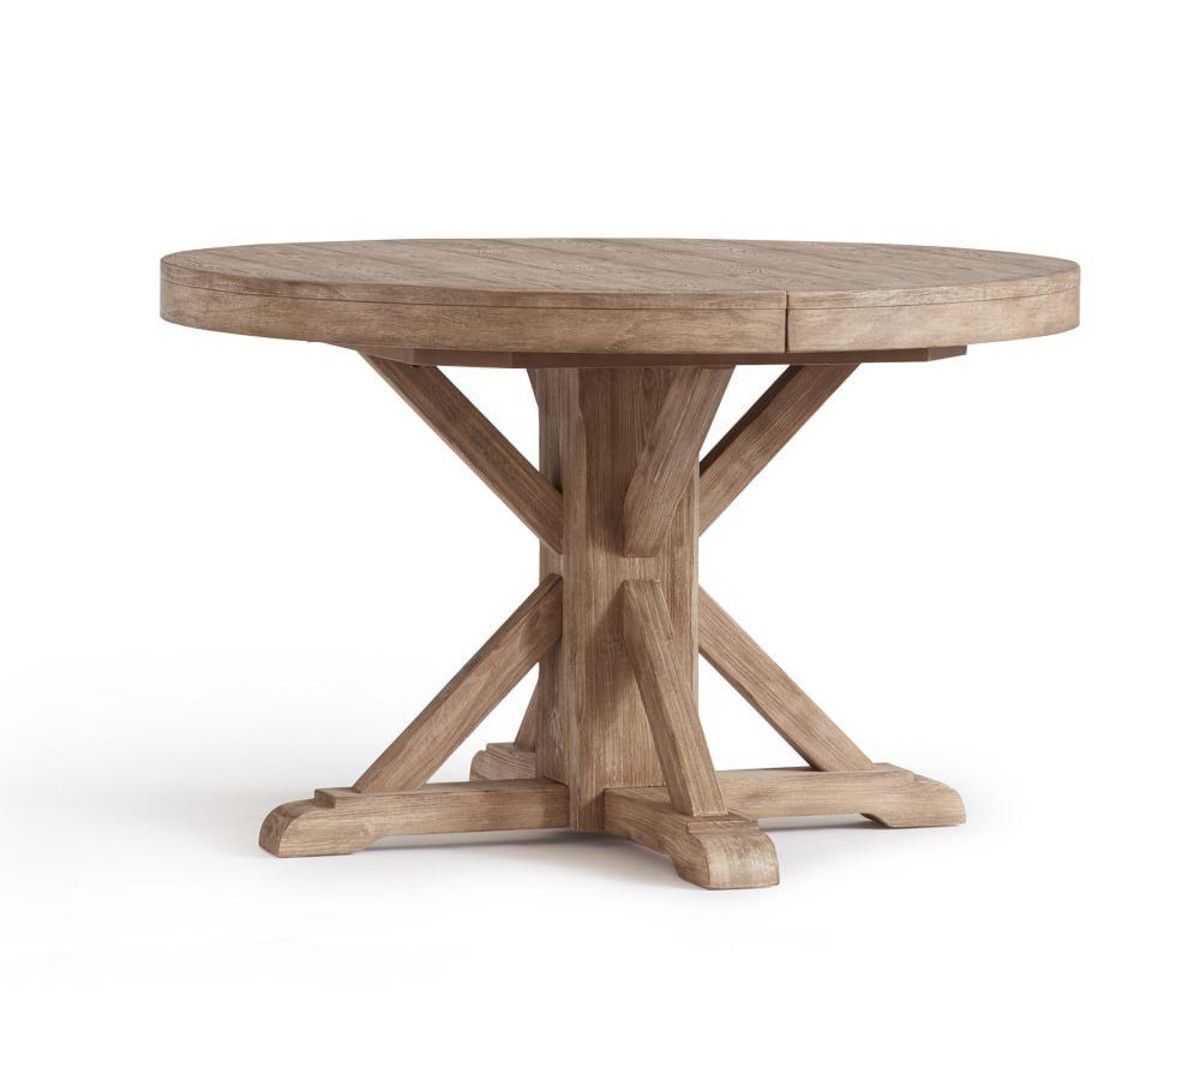 Benchwright Extending Round Table – Seadrift | New House With Regard To Current Seadrift Benchwright Dining Tables (View 3 of 25)